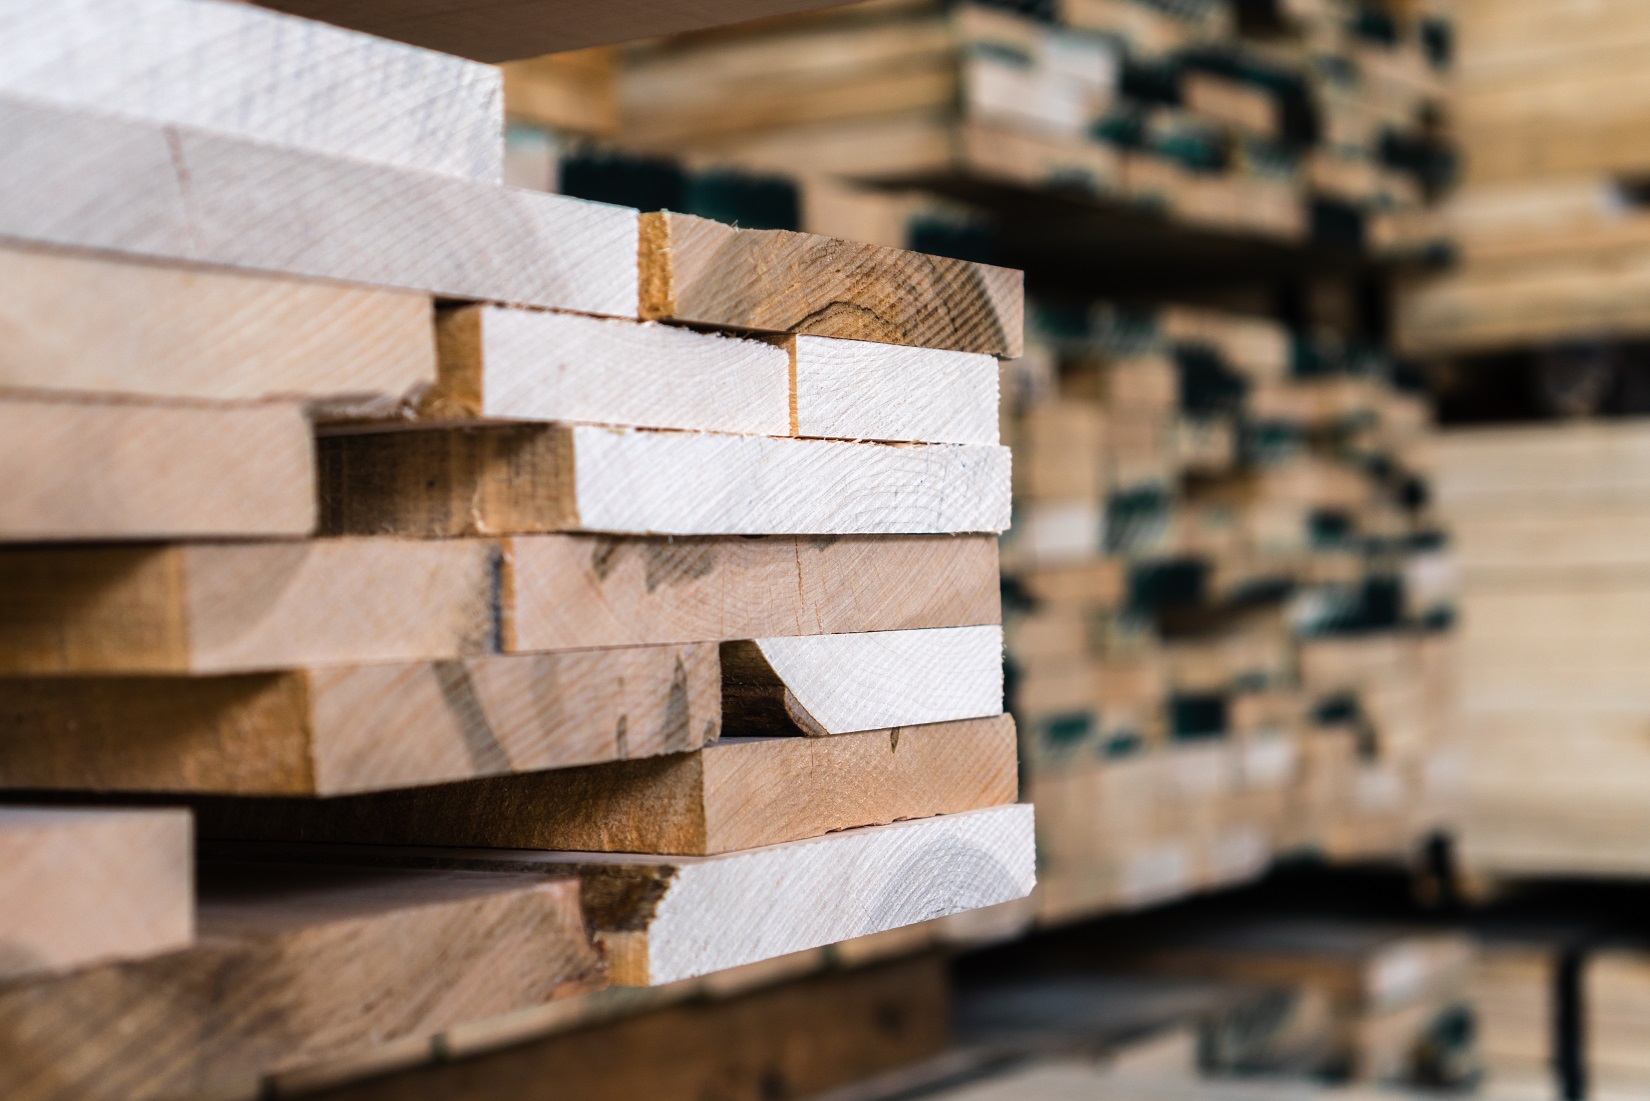 Stacks of lumber for recycling